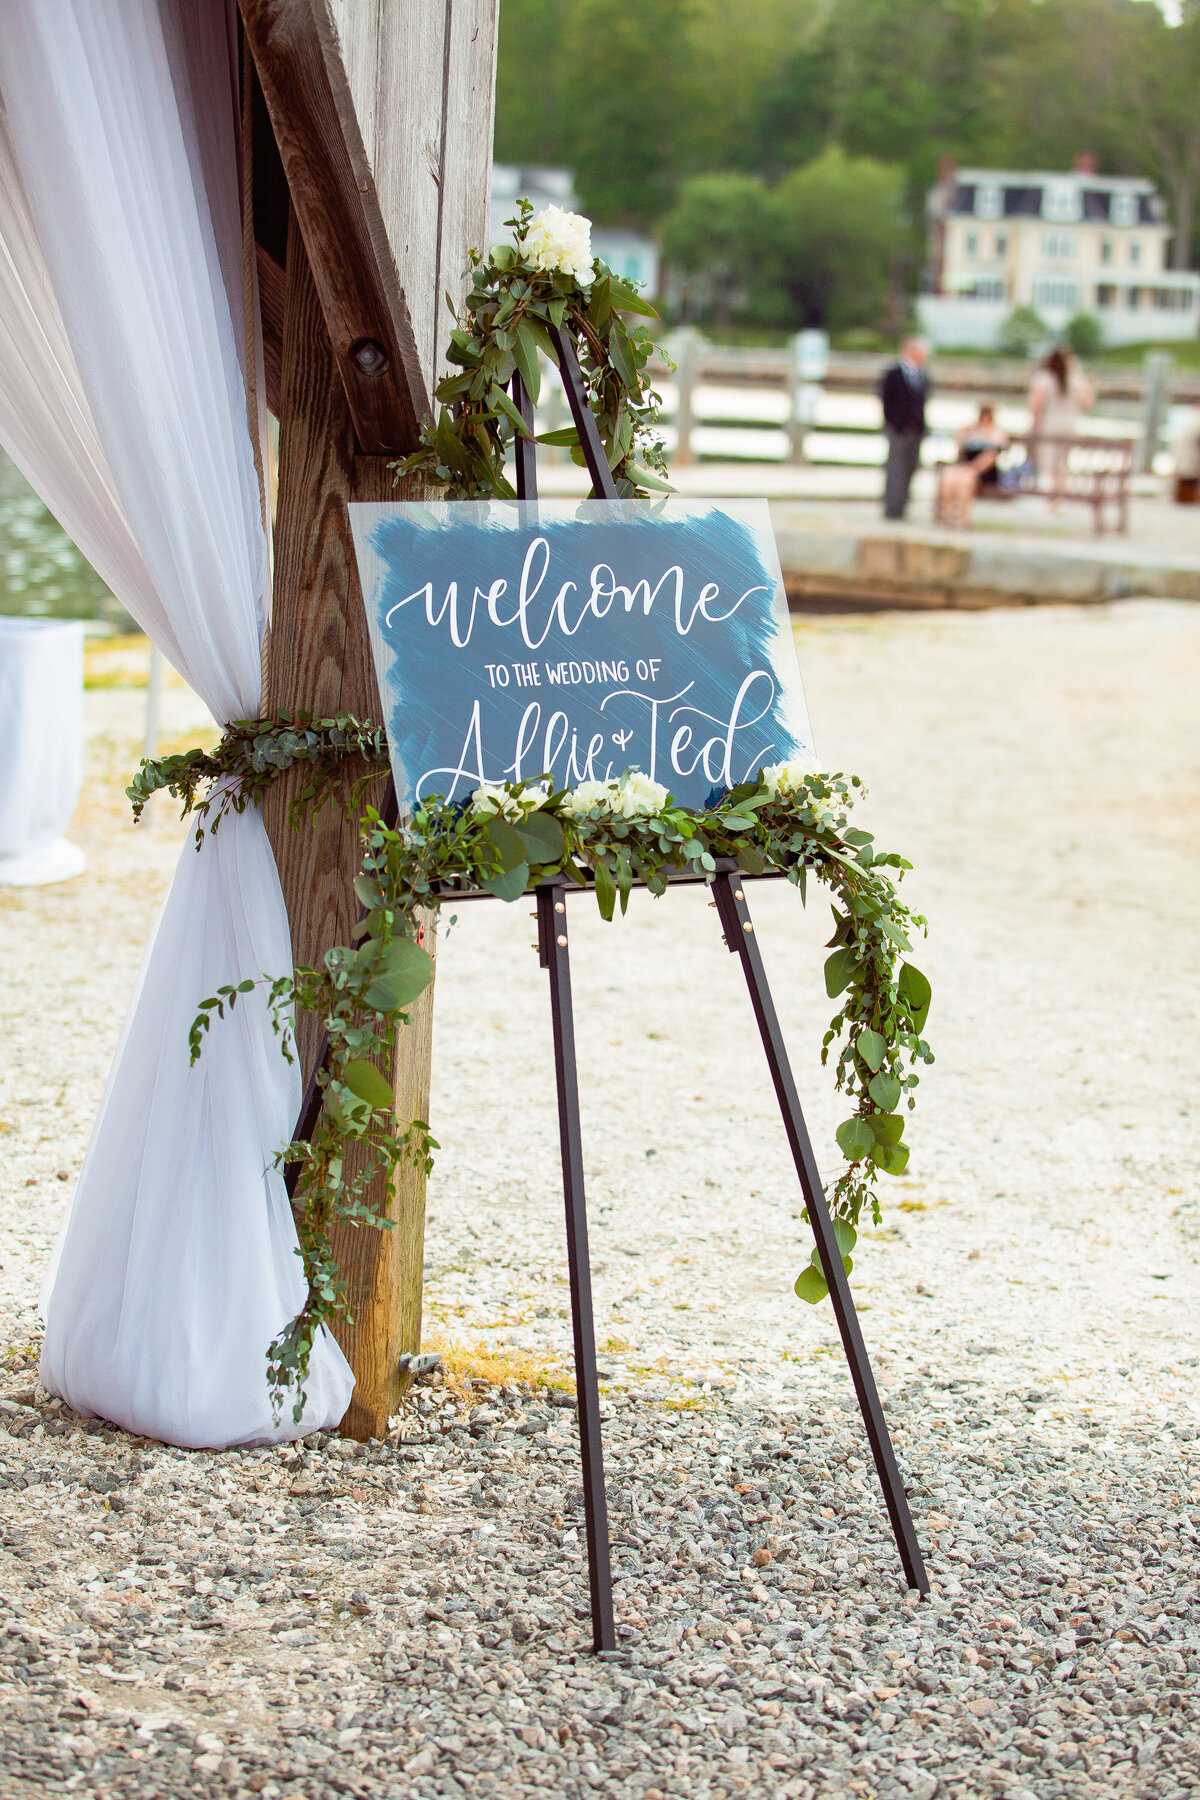 Welcome sign for a wedding at the Boatshed in the Mystic Seaport.